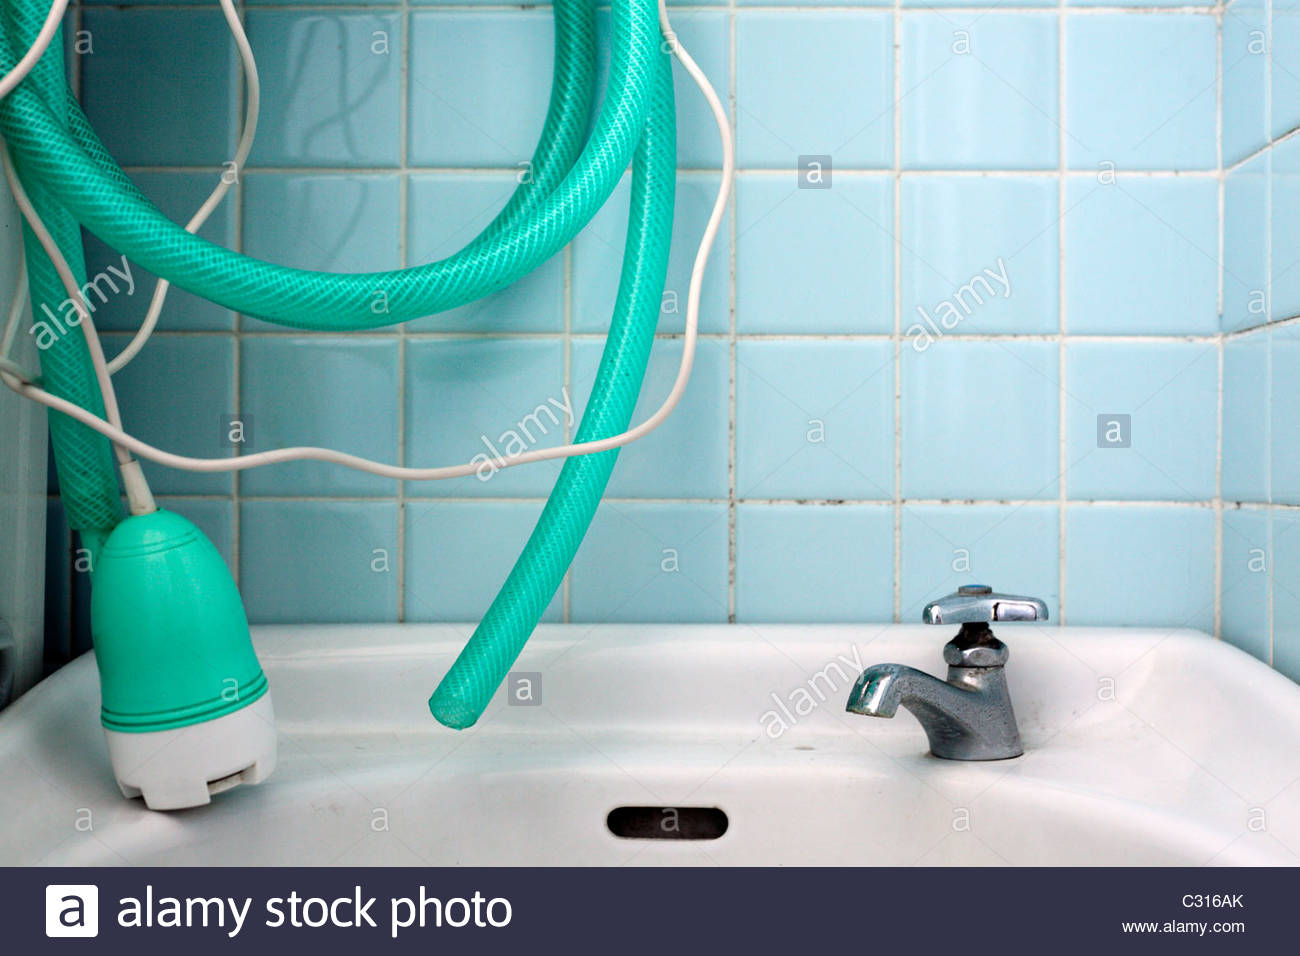 Small Bathroom Sink With Hose A Electric Water Pump And Faucet